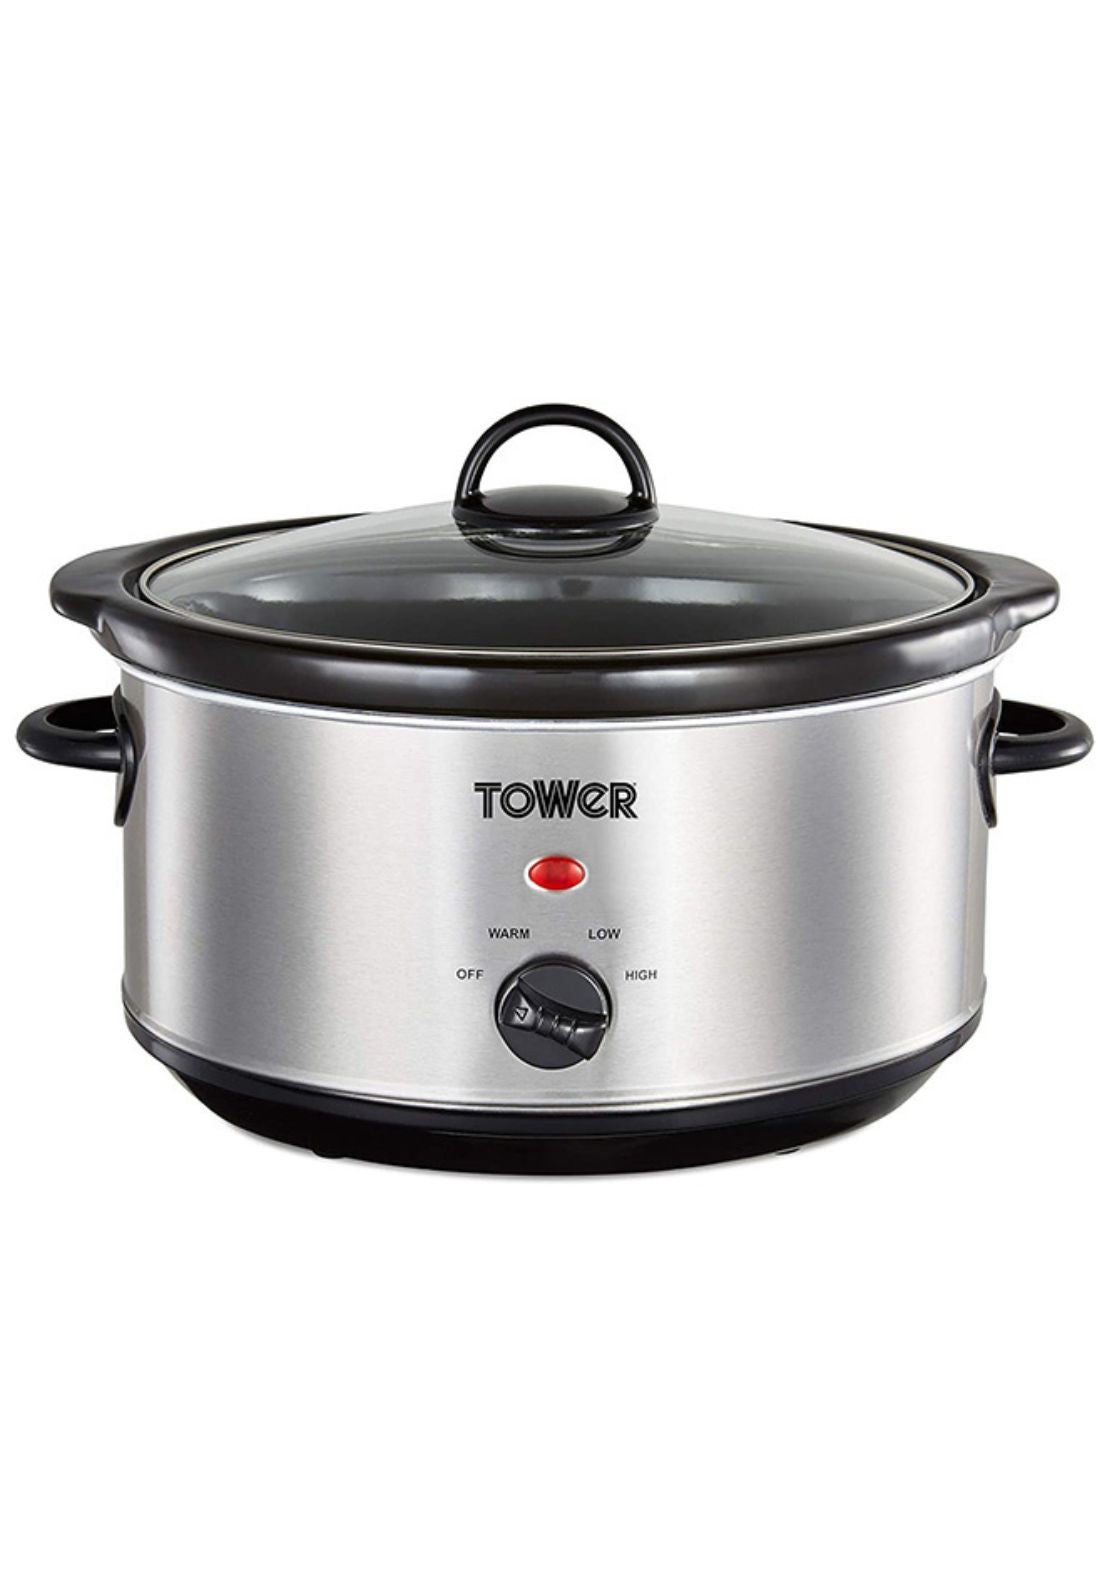 Tower 3.5L Slow Cooker Black Handles 1 Shaws Department Stores